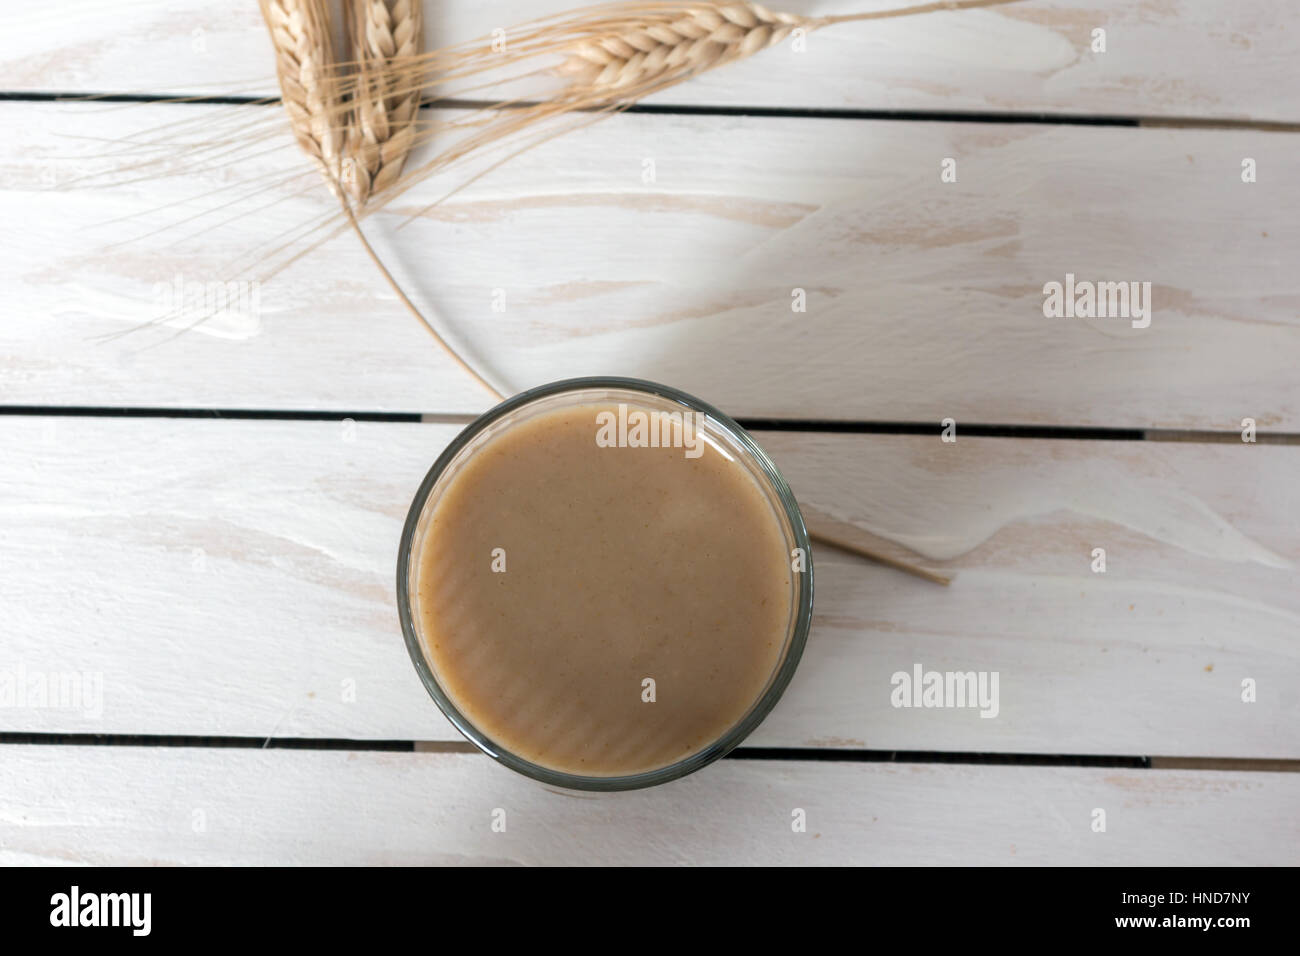 Traditional Drink from Balkan Peninsula Boza (fermented cereal beverage) and wheat over white wooden background Stock Photo